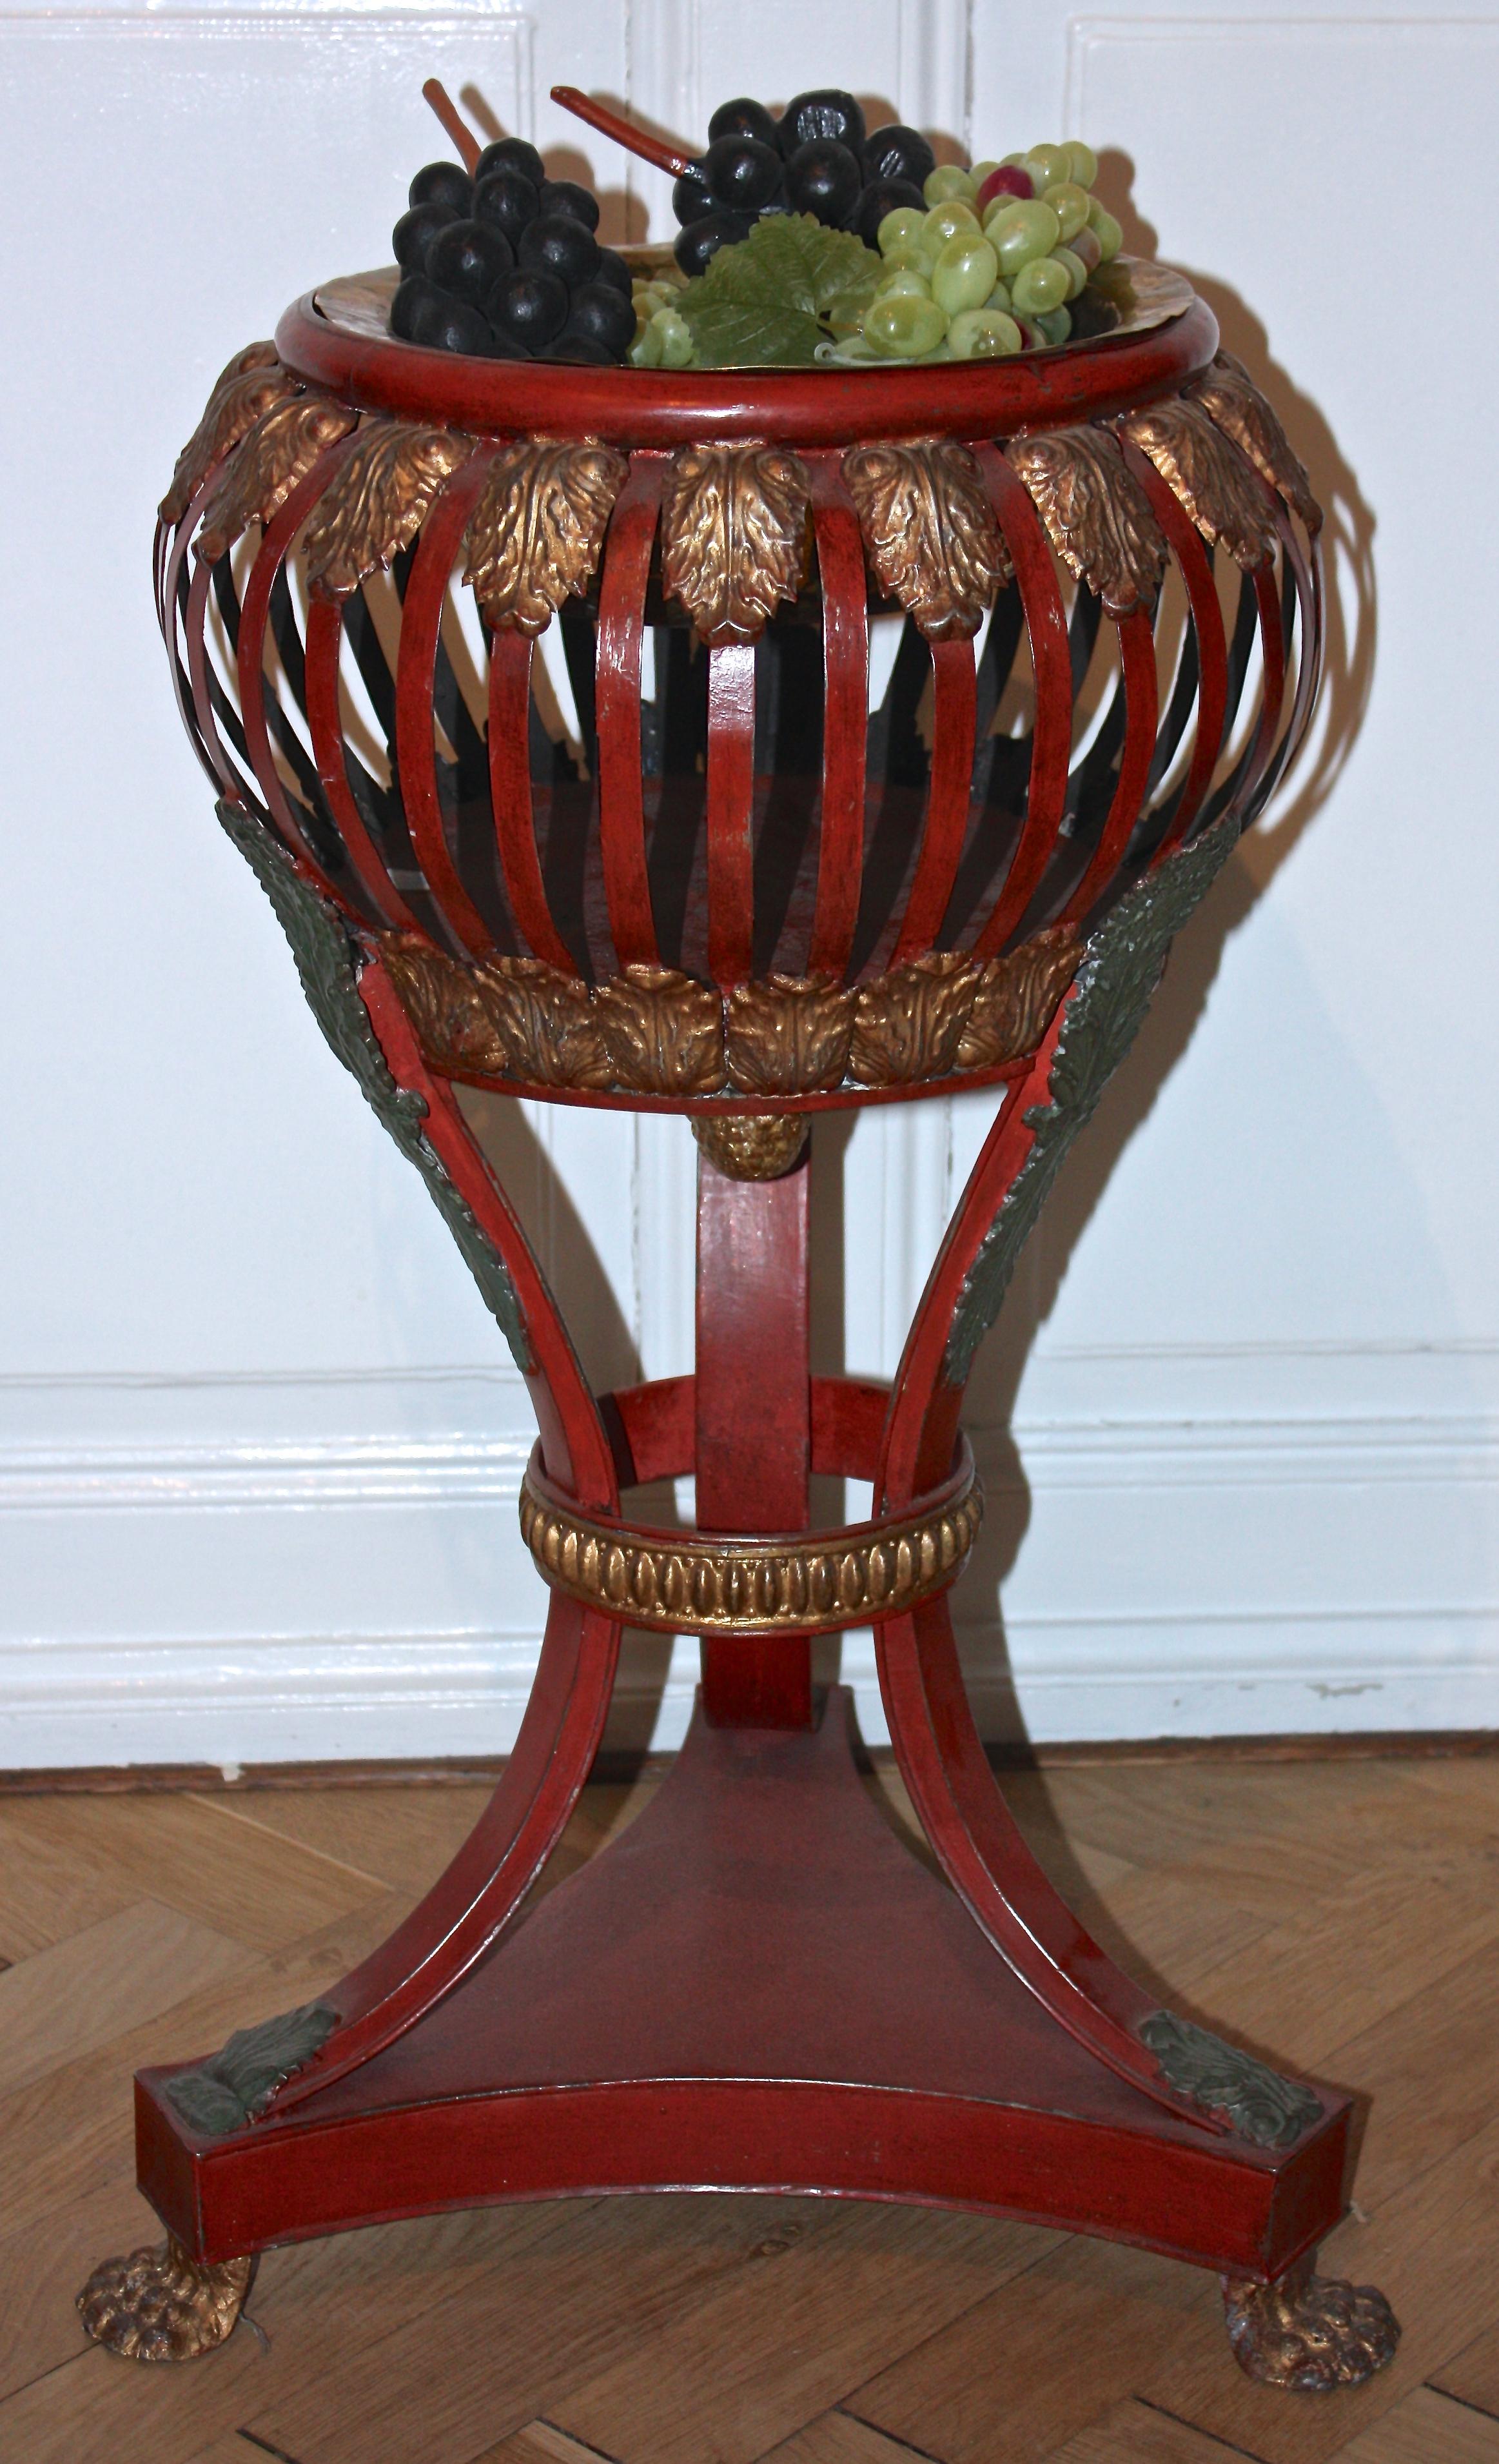 20th Century Red And Gold Leaf Painted Art Nouveau Toleware Planter Or Champagne Cooler For Sale